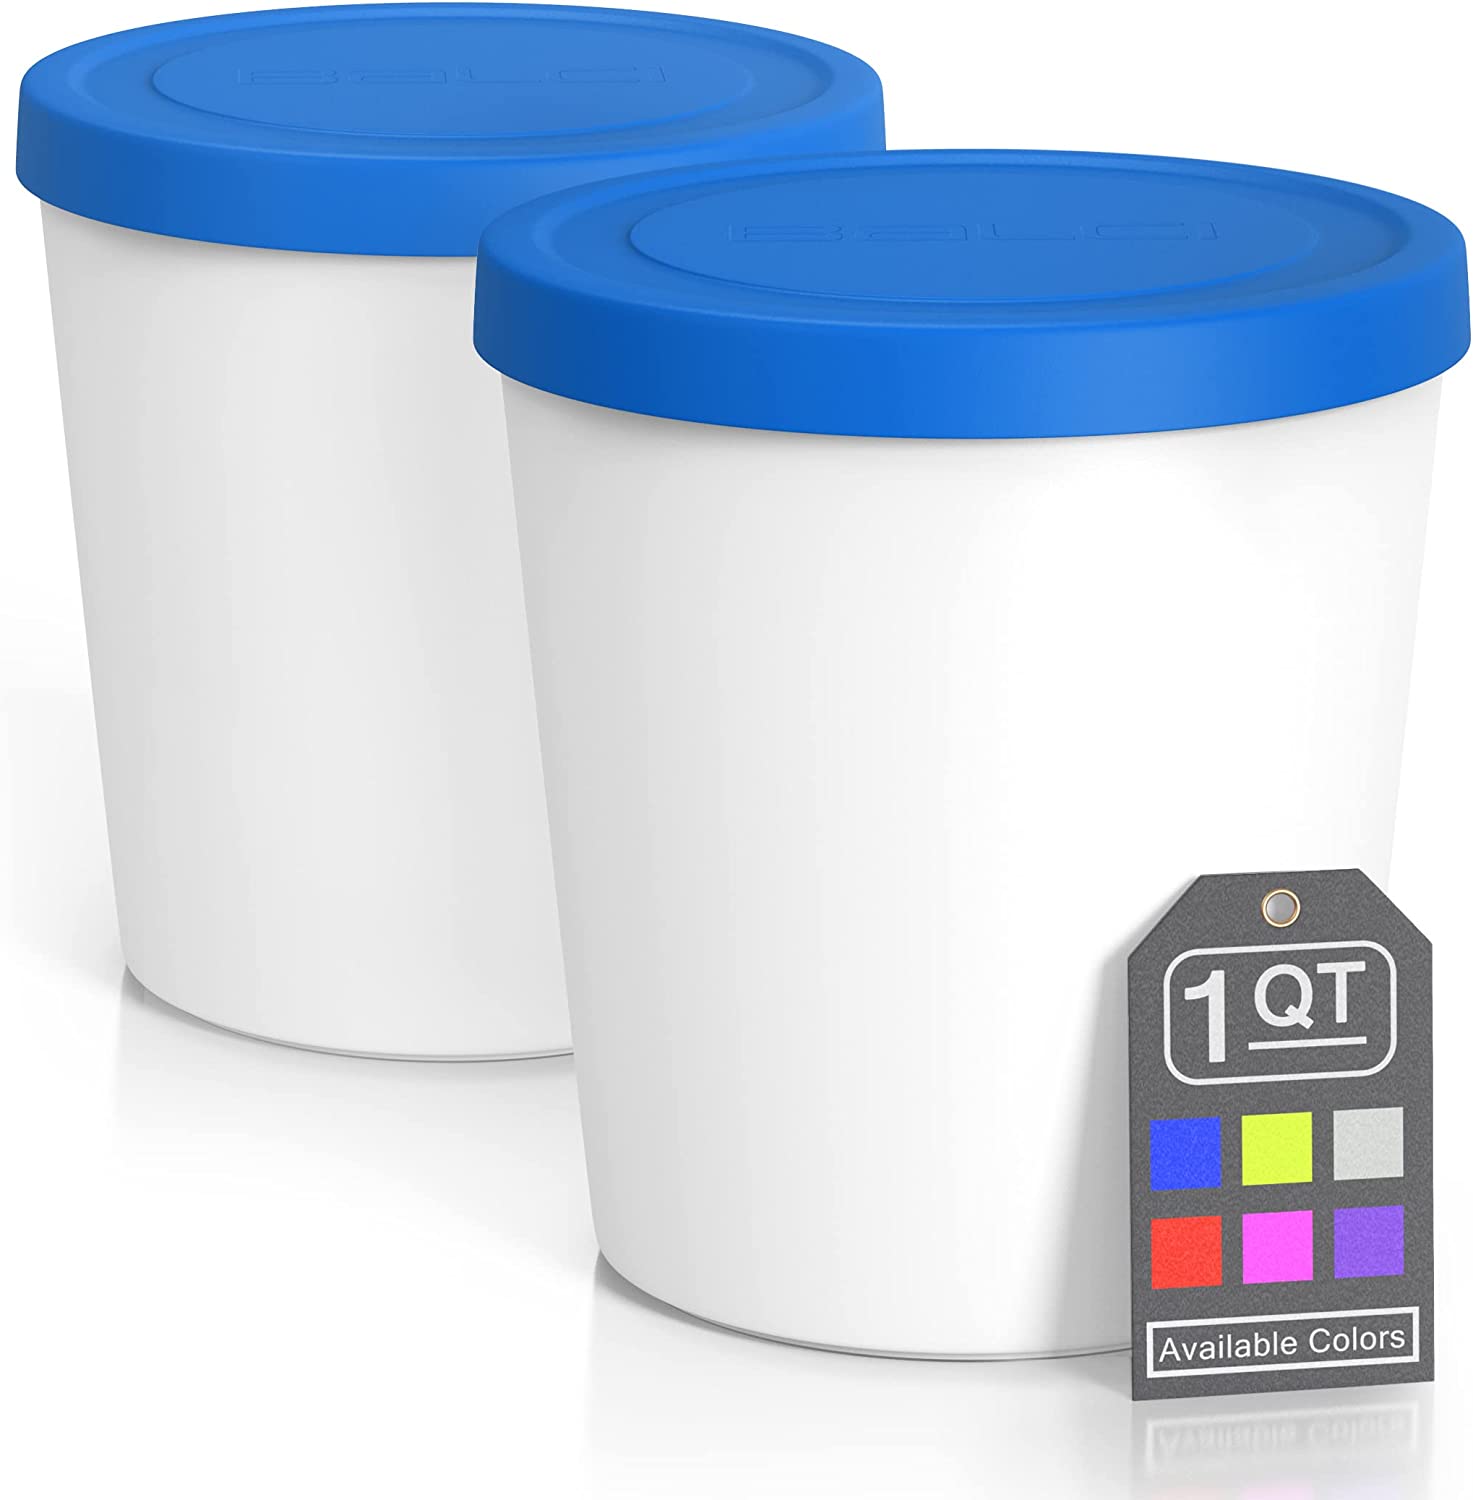 Tovolo Mini Sweet Treat Ice Cream Tubs, 6 Oz. Mini Ice Cream Tubs, Set Of 3 Reusable  Containers, Tight-Fitting Silicone Lid, Easy Stacking Reusable Ice Cream  Container & Reviews